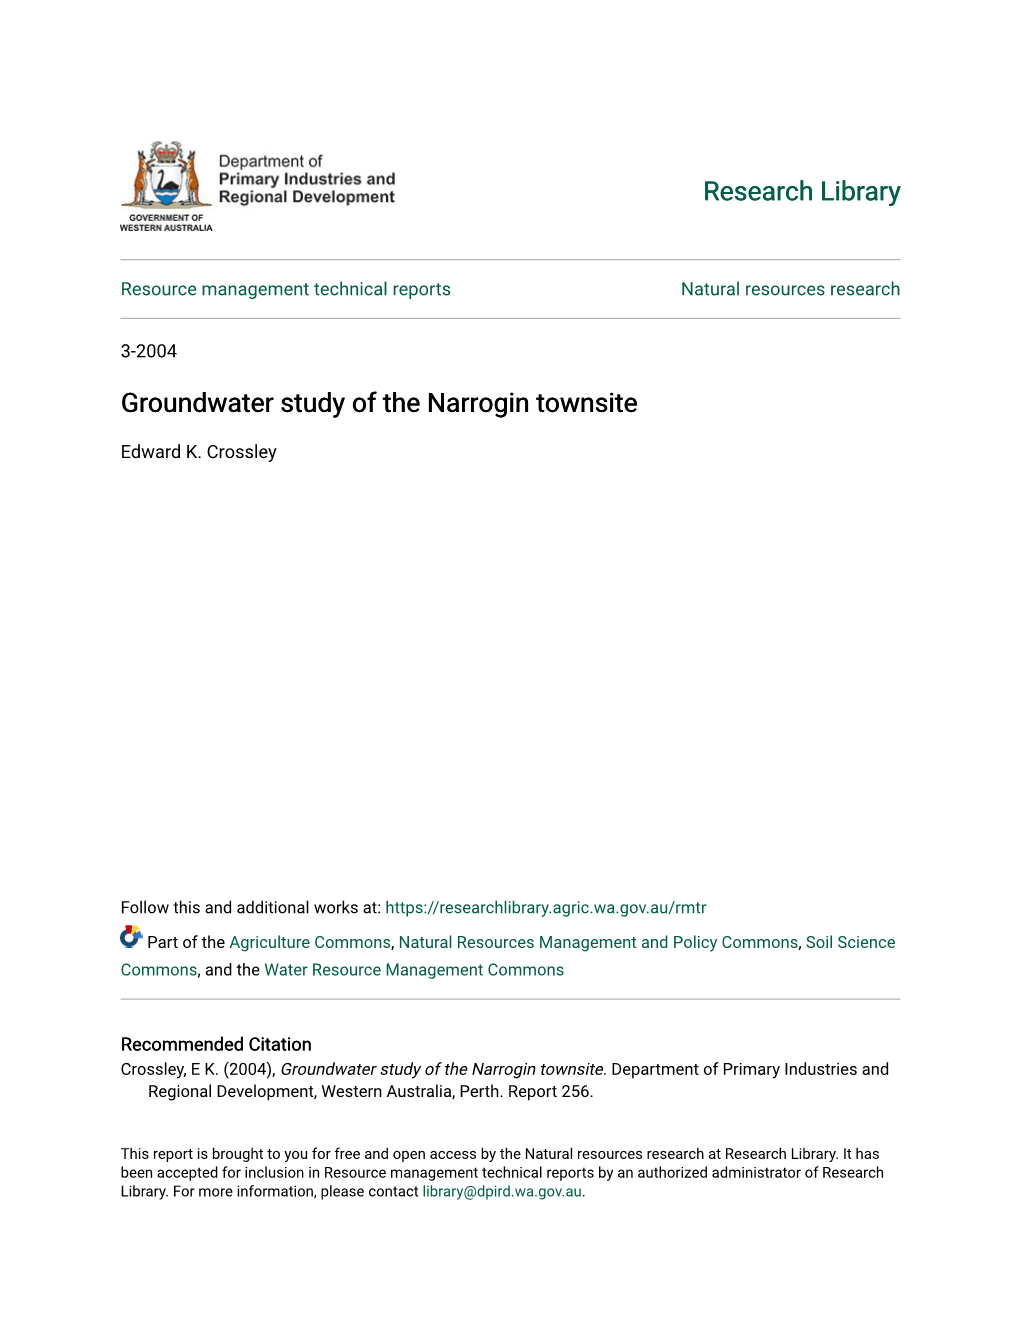 Groundwater Study of the Narrogin Townsite